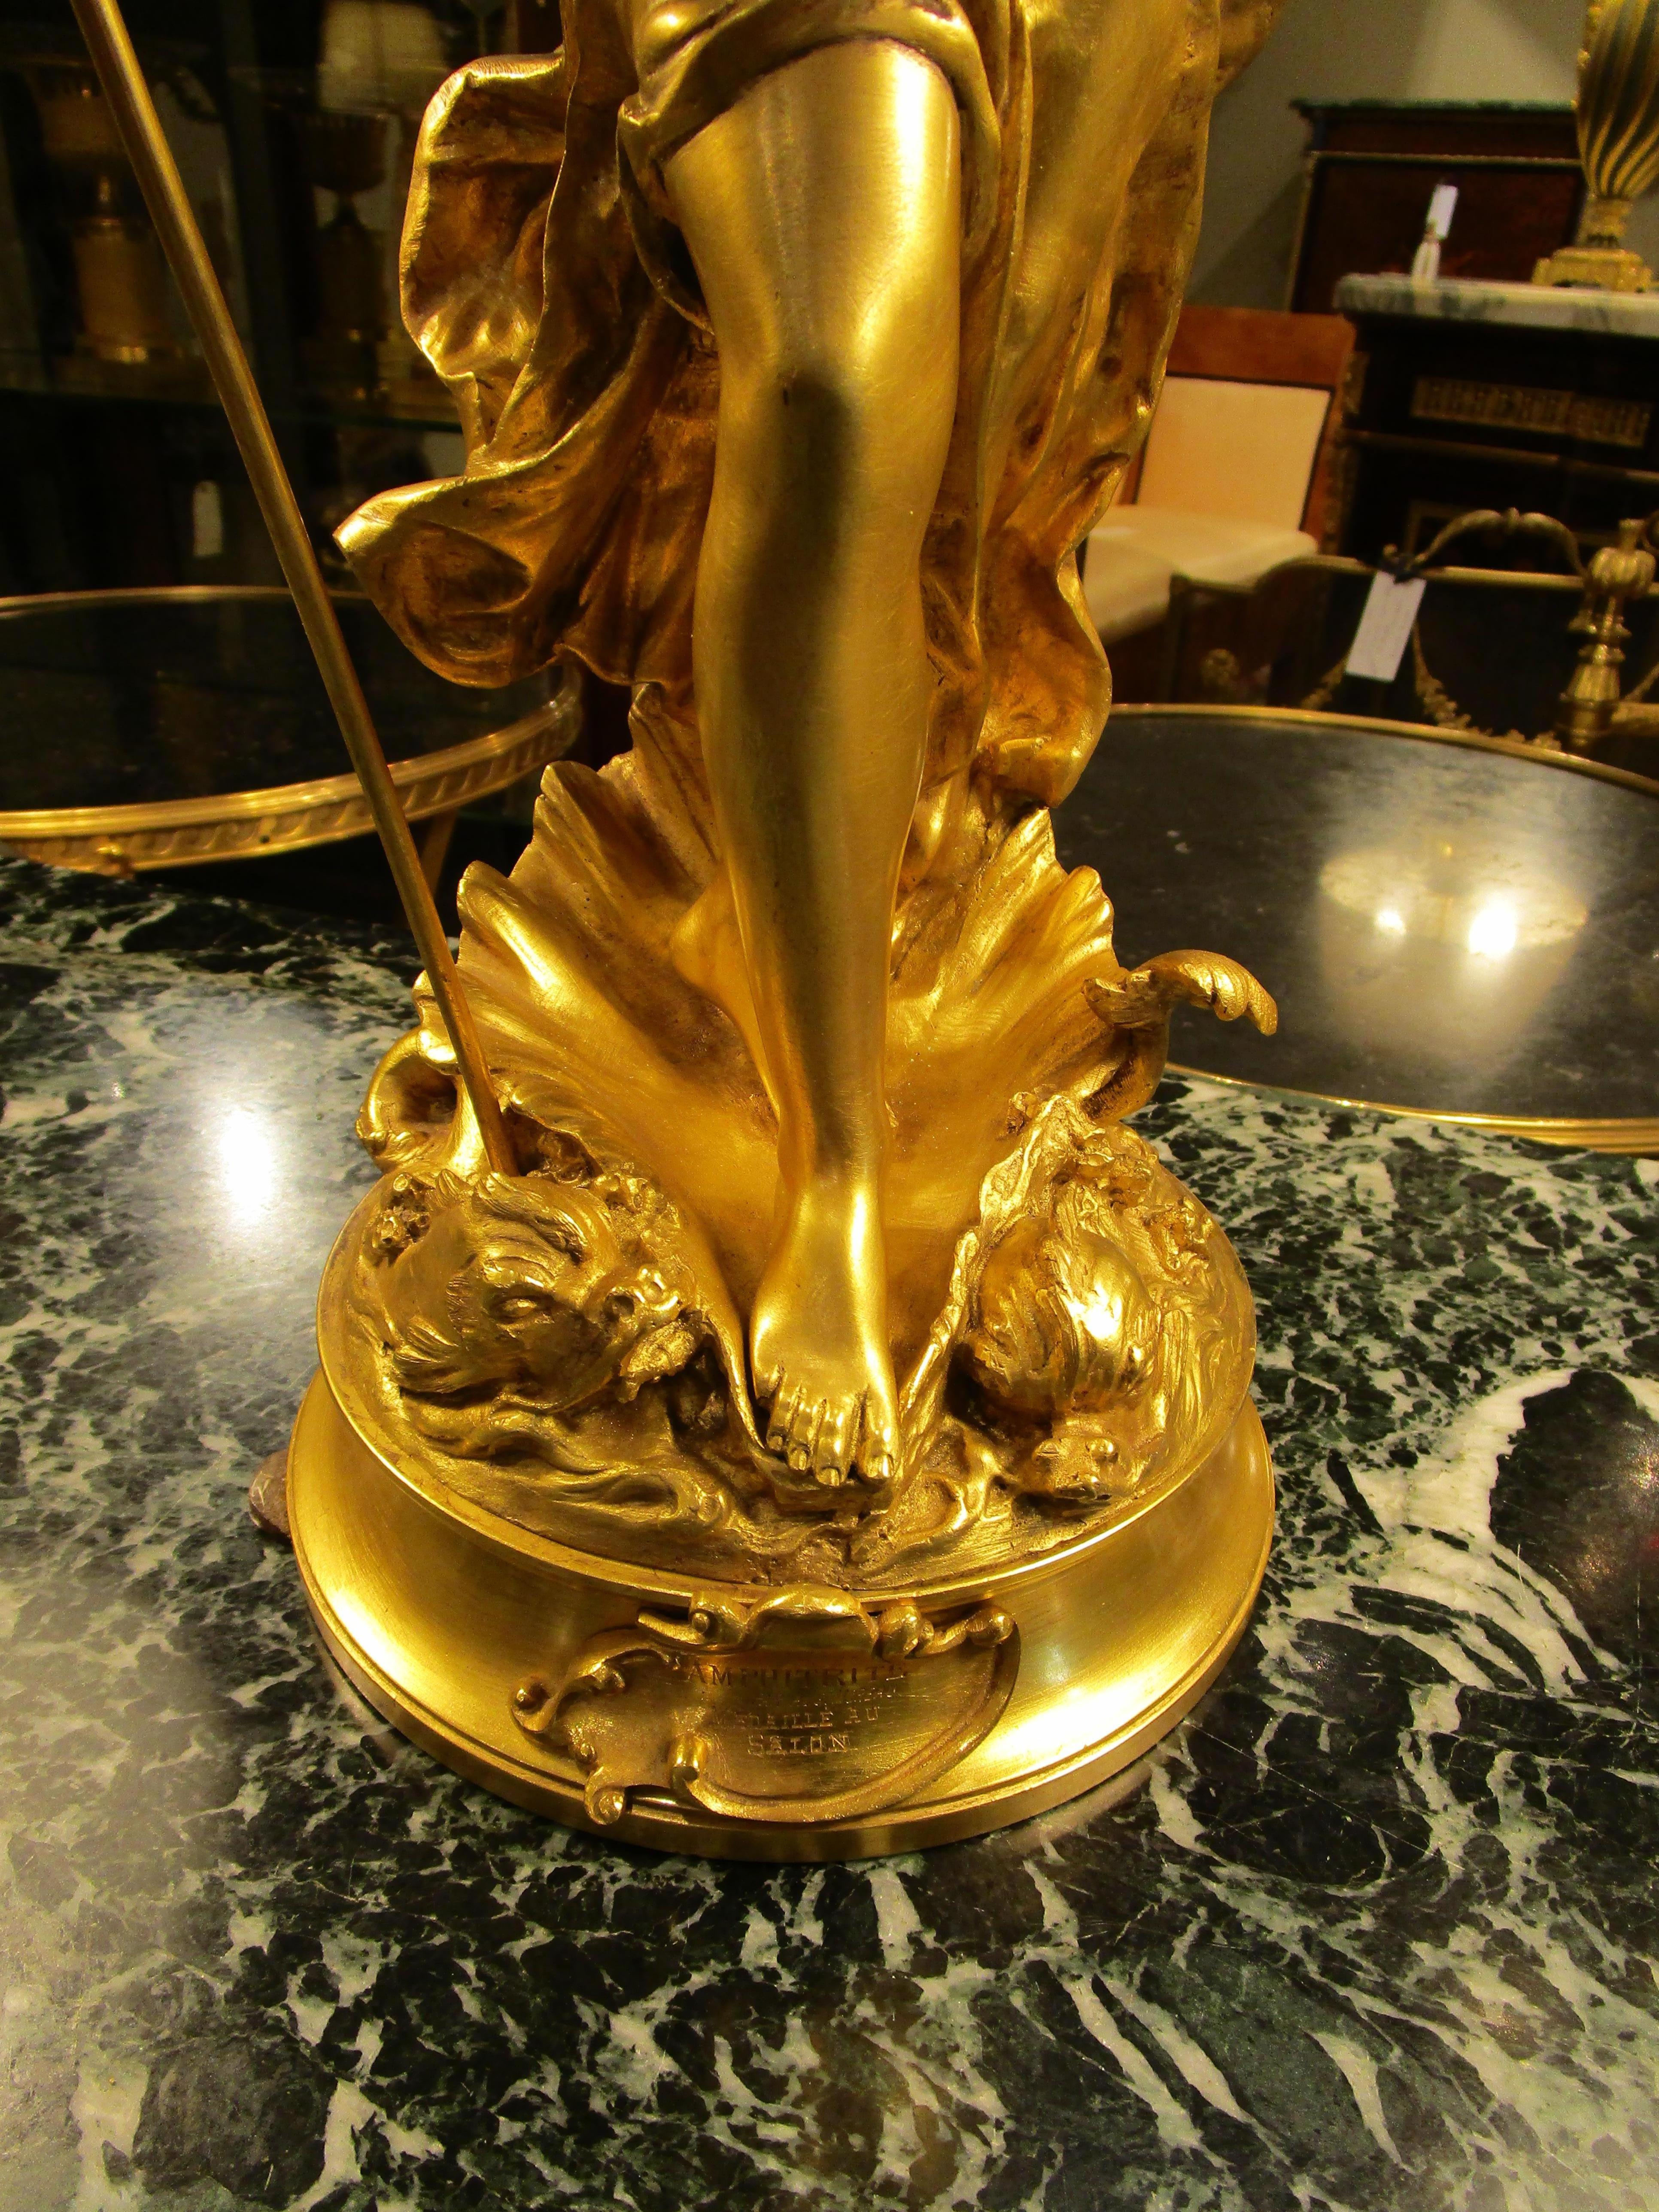 A fine 19th century French gilt bronze sculpture of Amphitrite by Auguste Moreau. Fine quality gilt bronze depicting Amphitrite with her dolphins on either side. The wife of Poseidon goddess of the sea. 